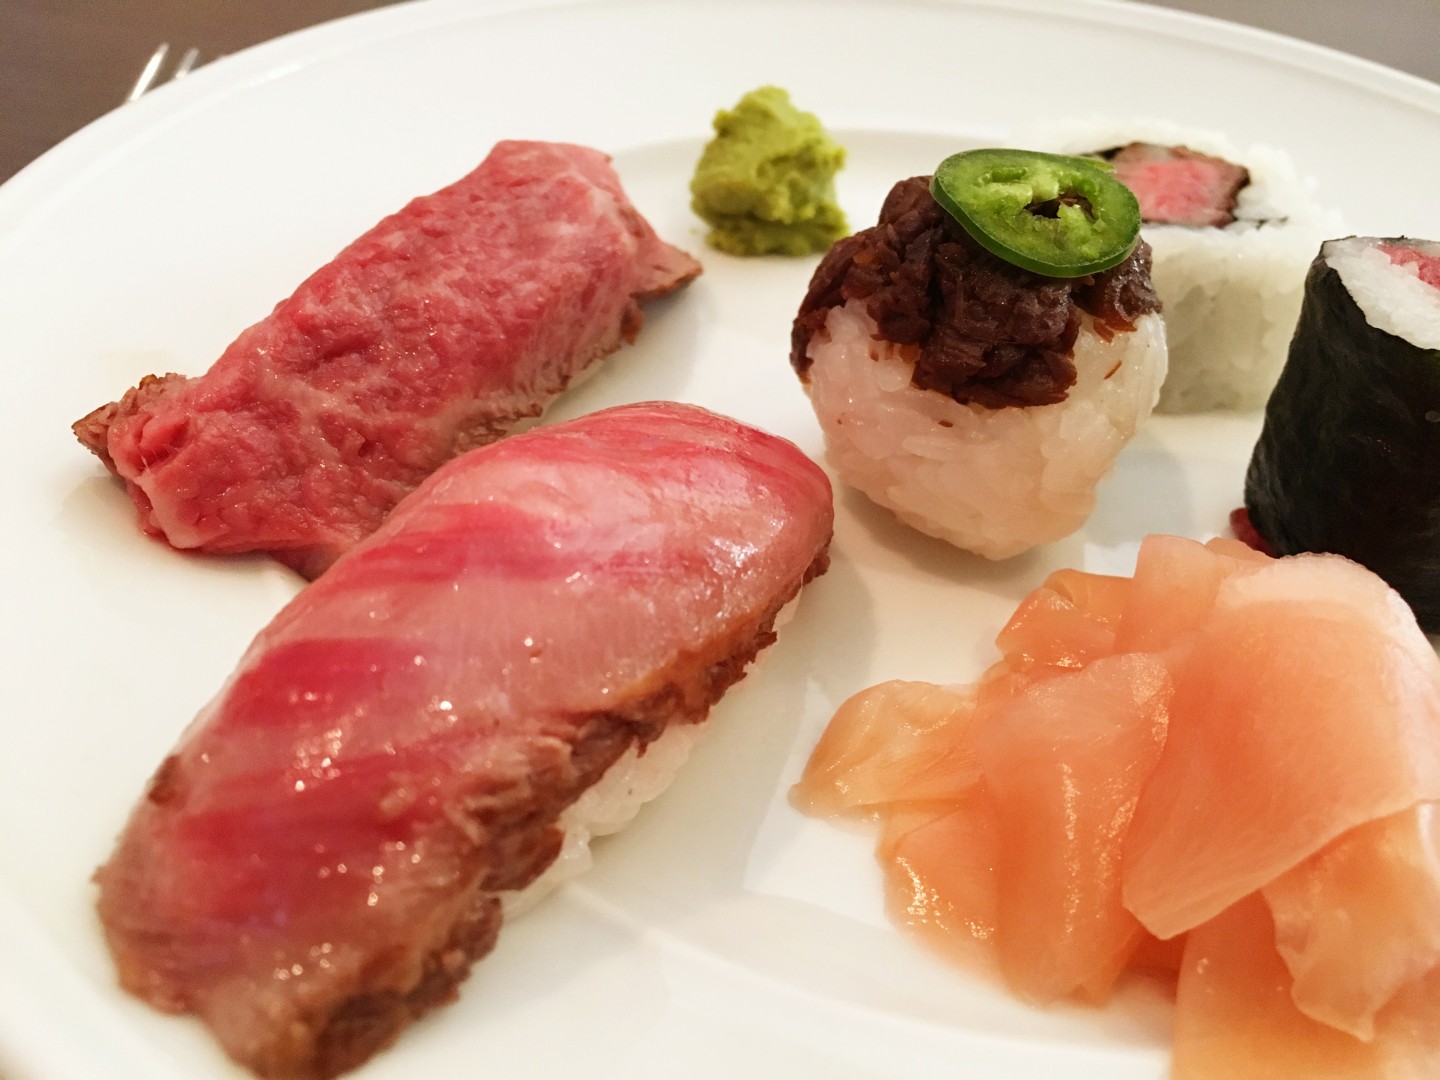 Matsusaka beef sushi platter, clockwise from the shiny on the front left: New York Strip tataki nigiri, flash-seared filet sushi roll, raw filet maki roll, spicy tuna roll, round beef cooked in mirin and soy and topped with jalapeno